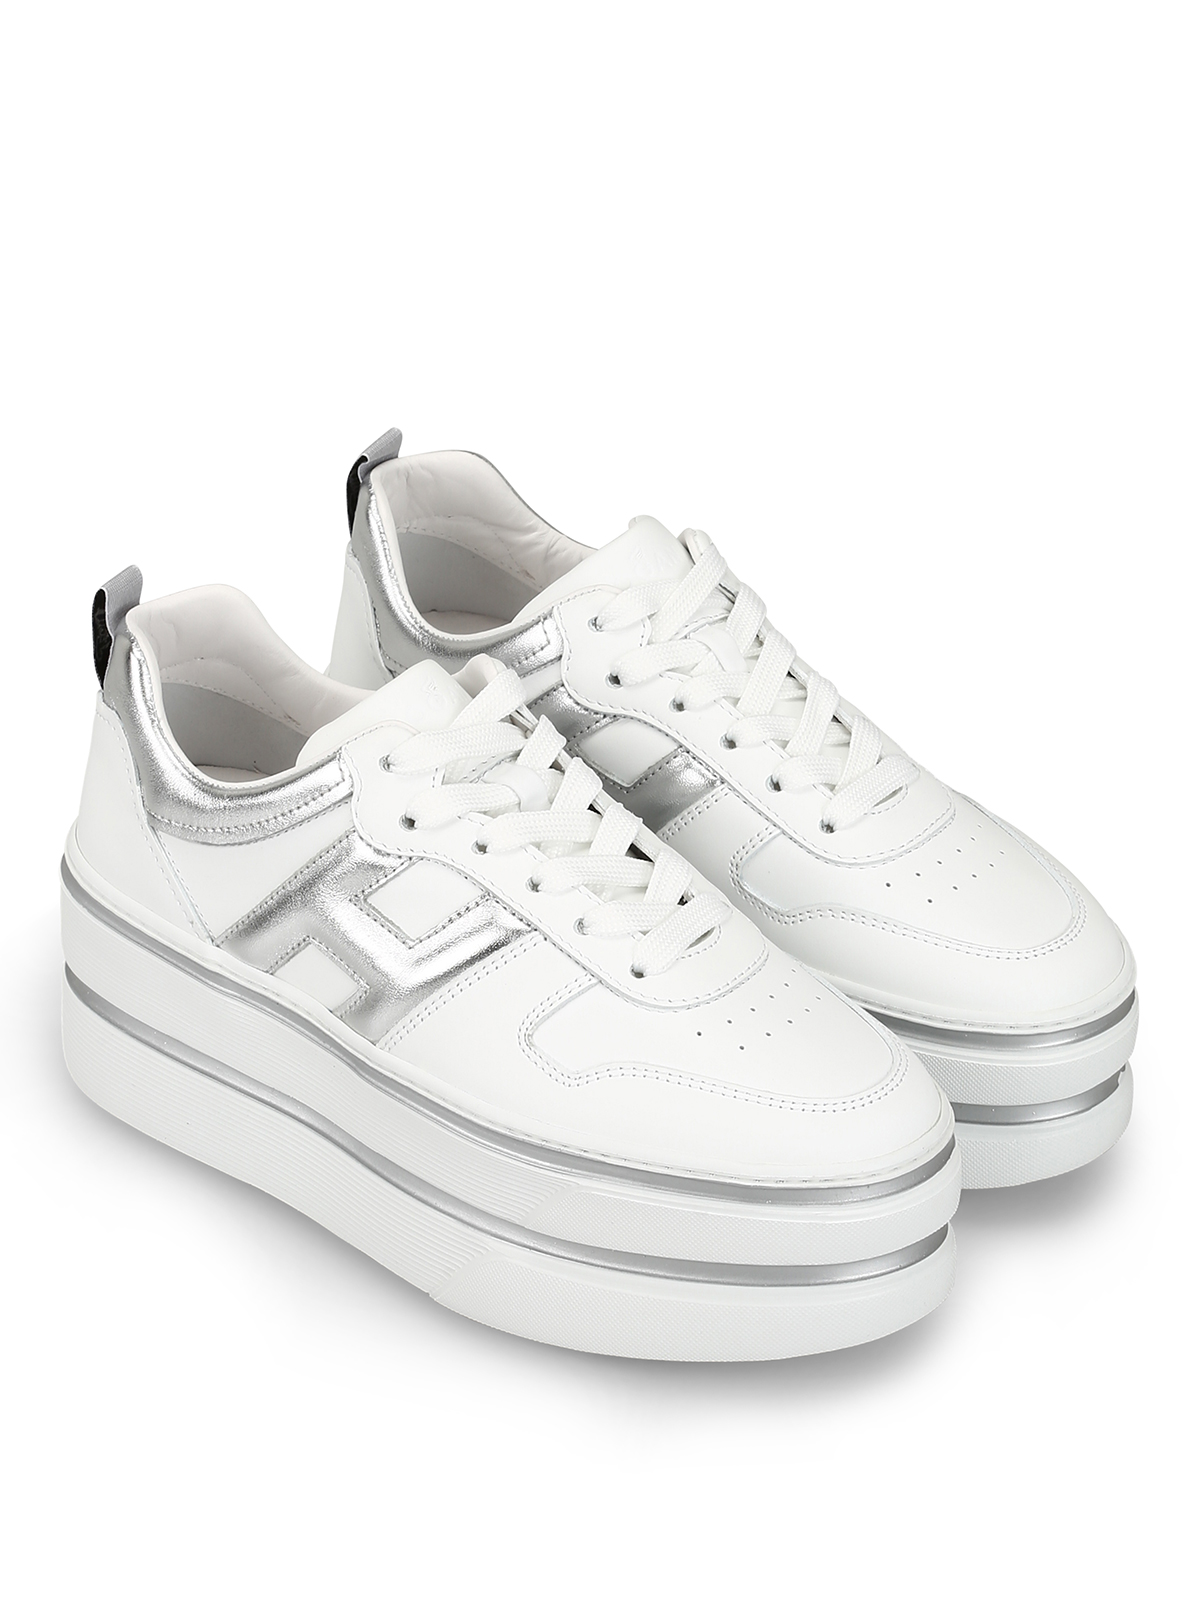 Trainers Hogan - H449 white leather oversized sneakers - GYW4490BS00I6W0351